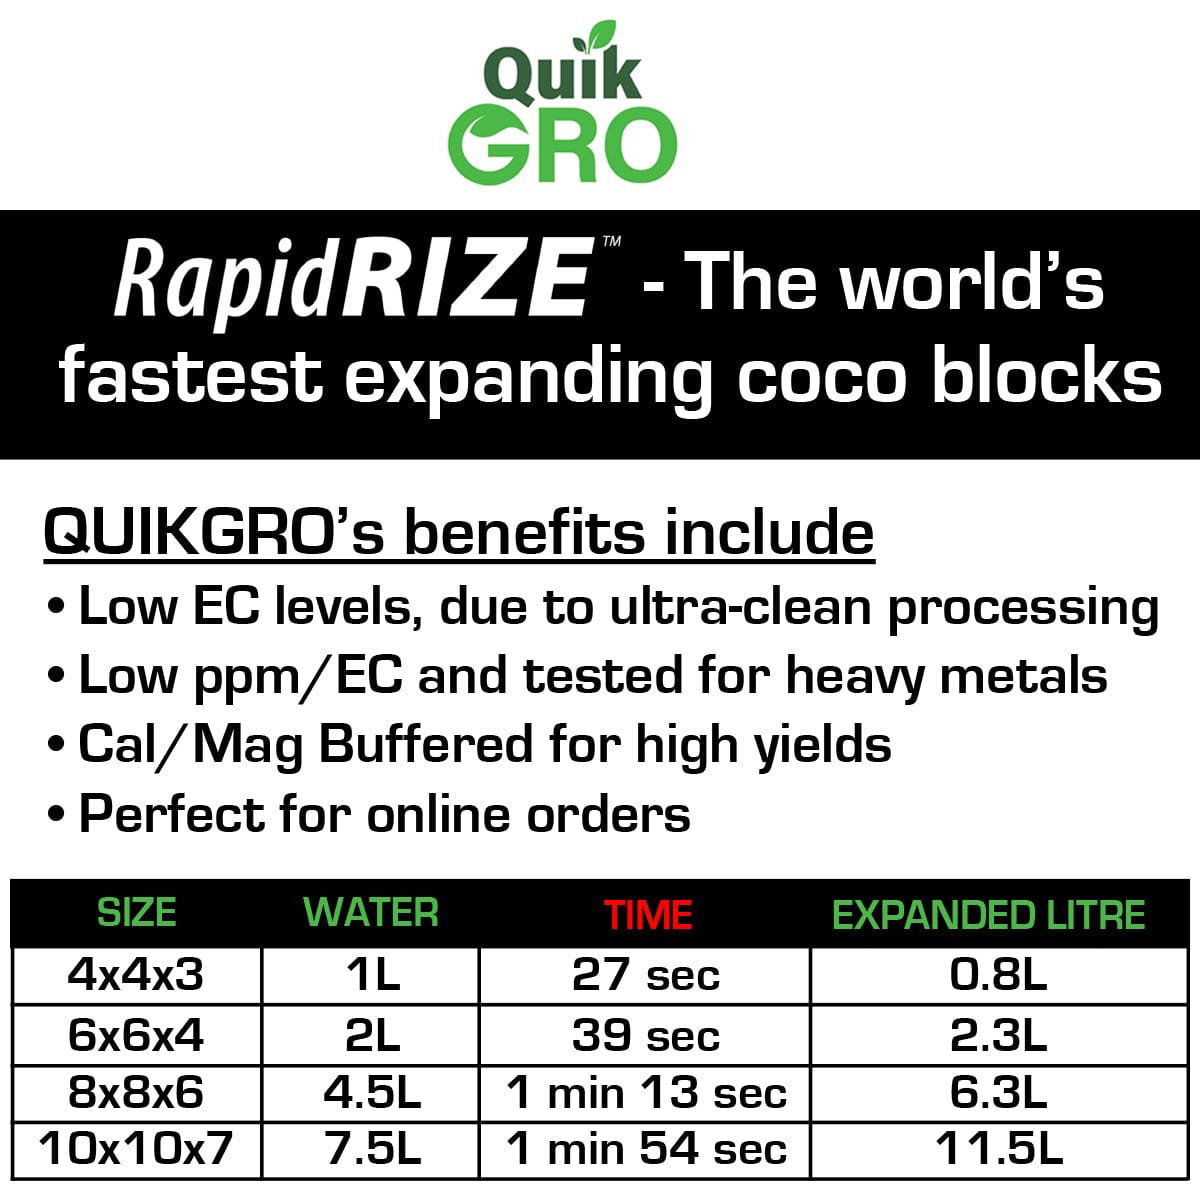 Quick Gro Hydroponic Supplies > Hydroponic Growing Media > Coco Coir QuickGro Rapid Rize Coco Coir Block (4 Sizes)